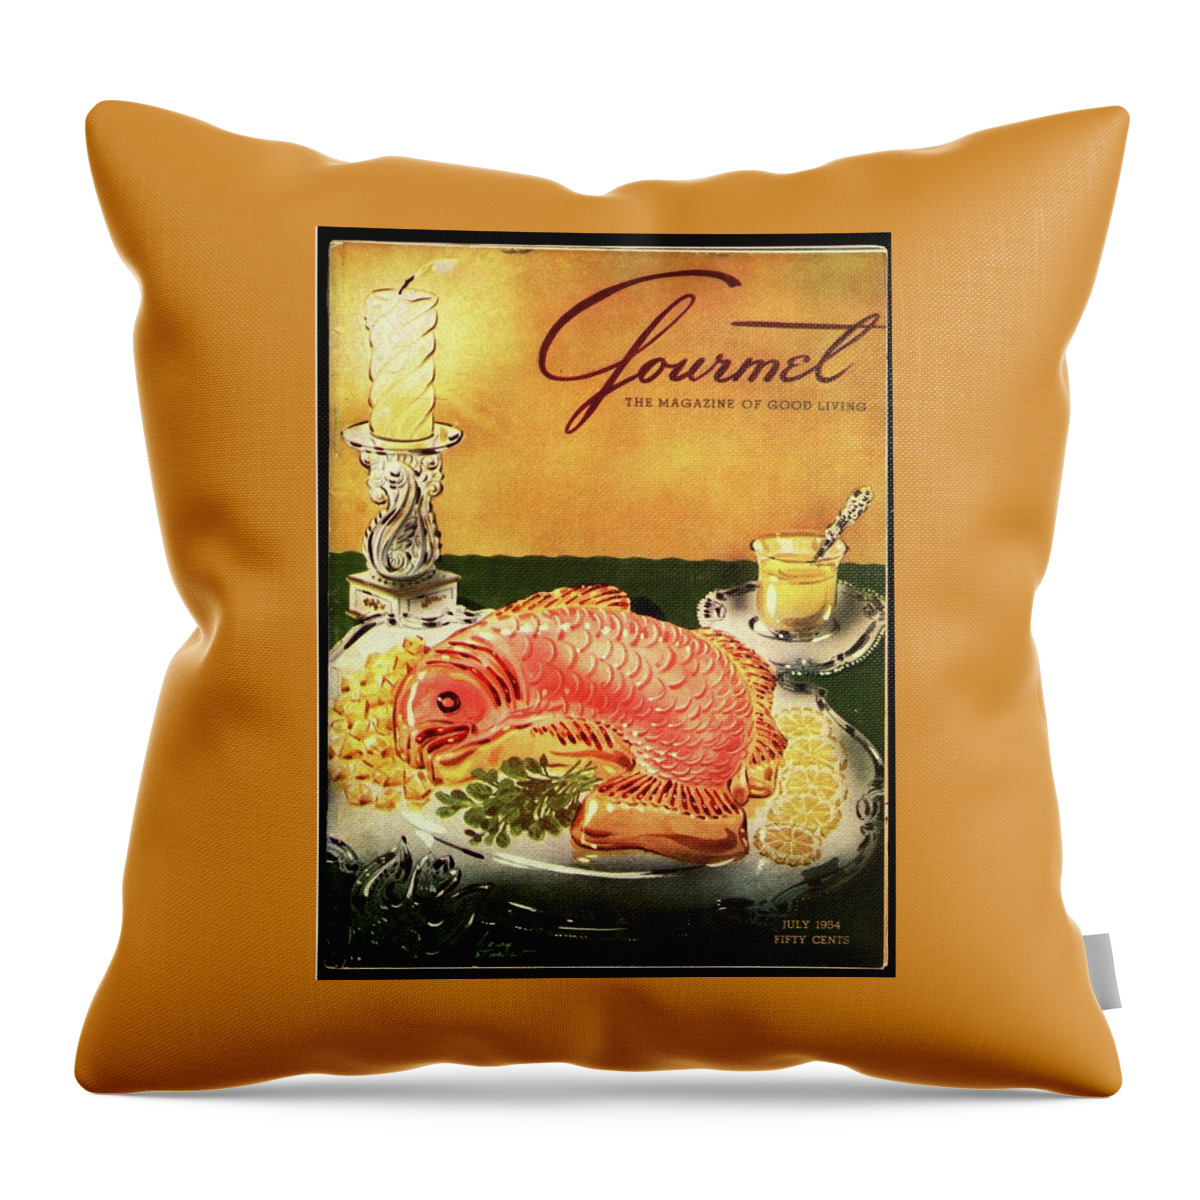 Gourmet Cover Illustration Of Salmon Mousse Throw Pillow